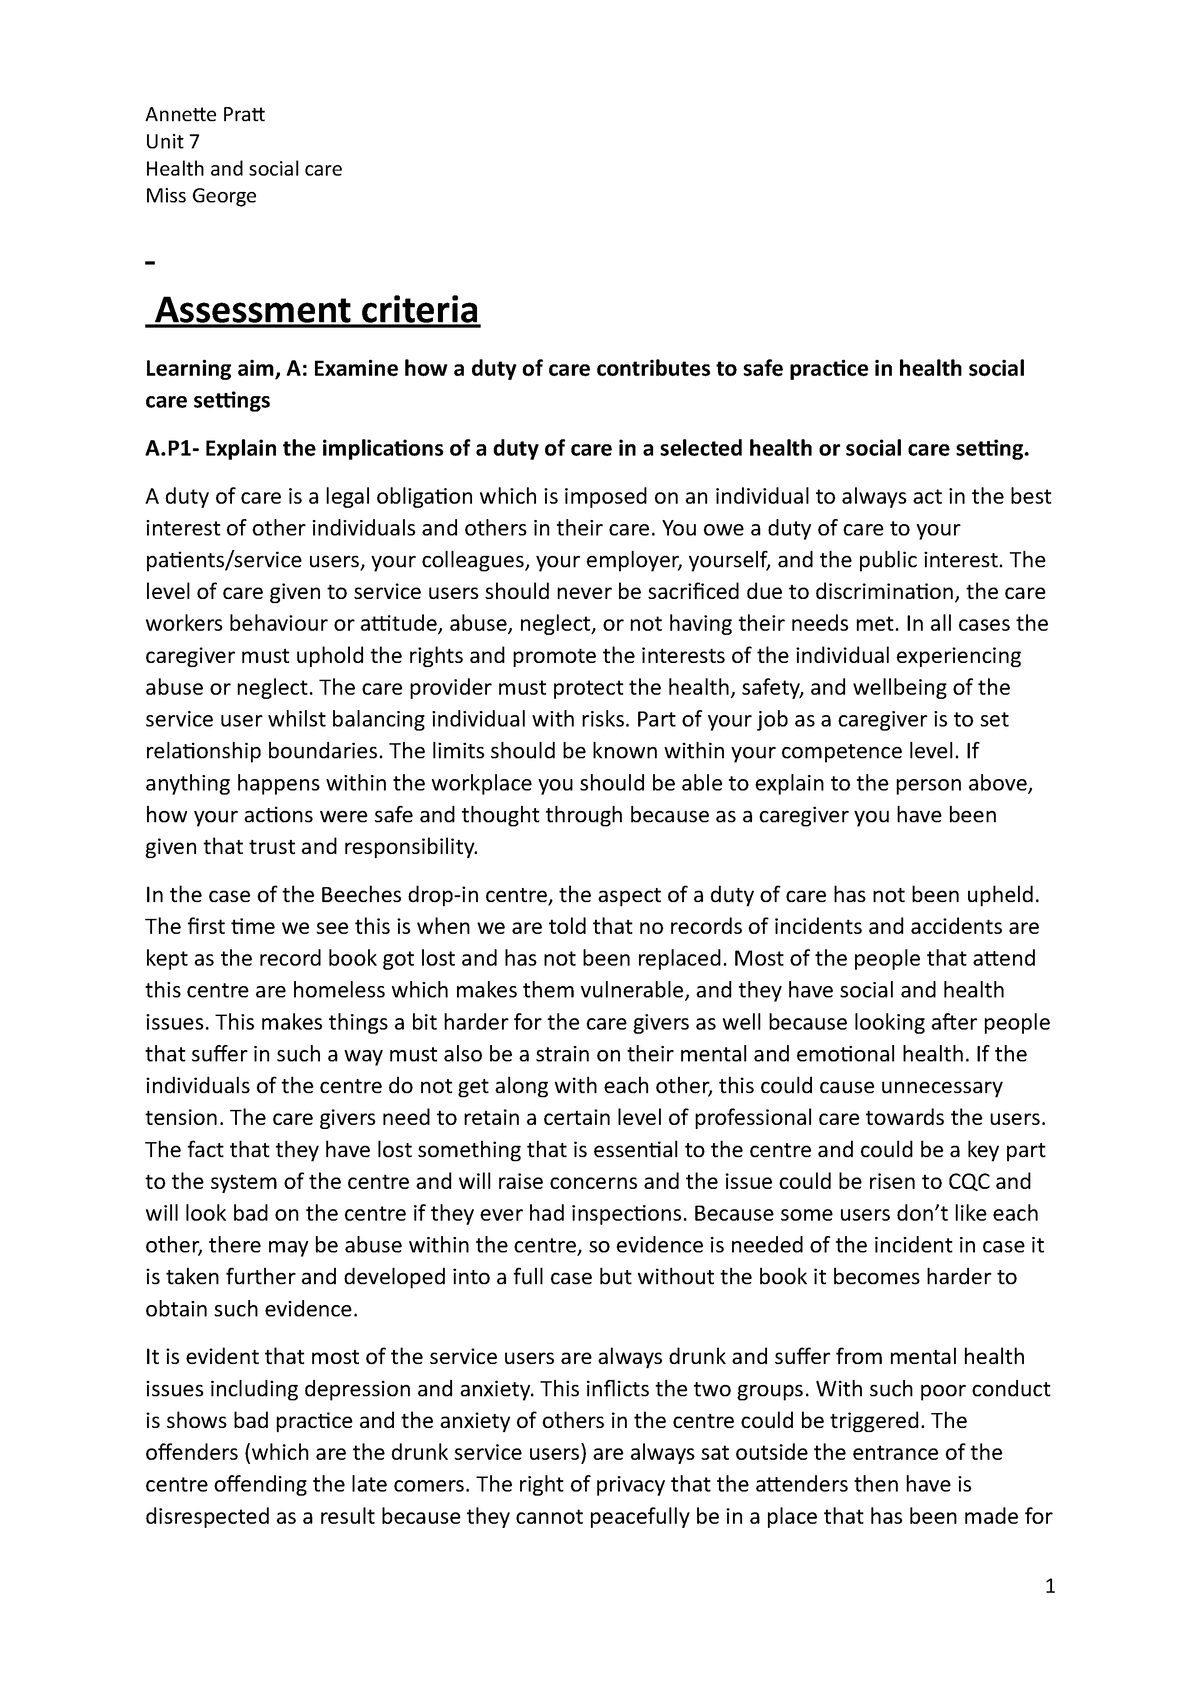 unit 7 coursework health and social care